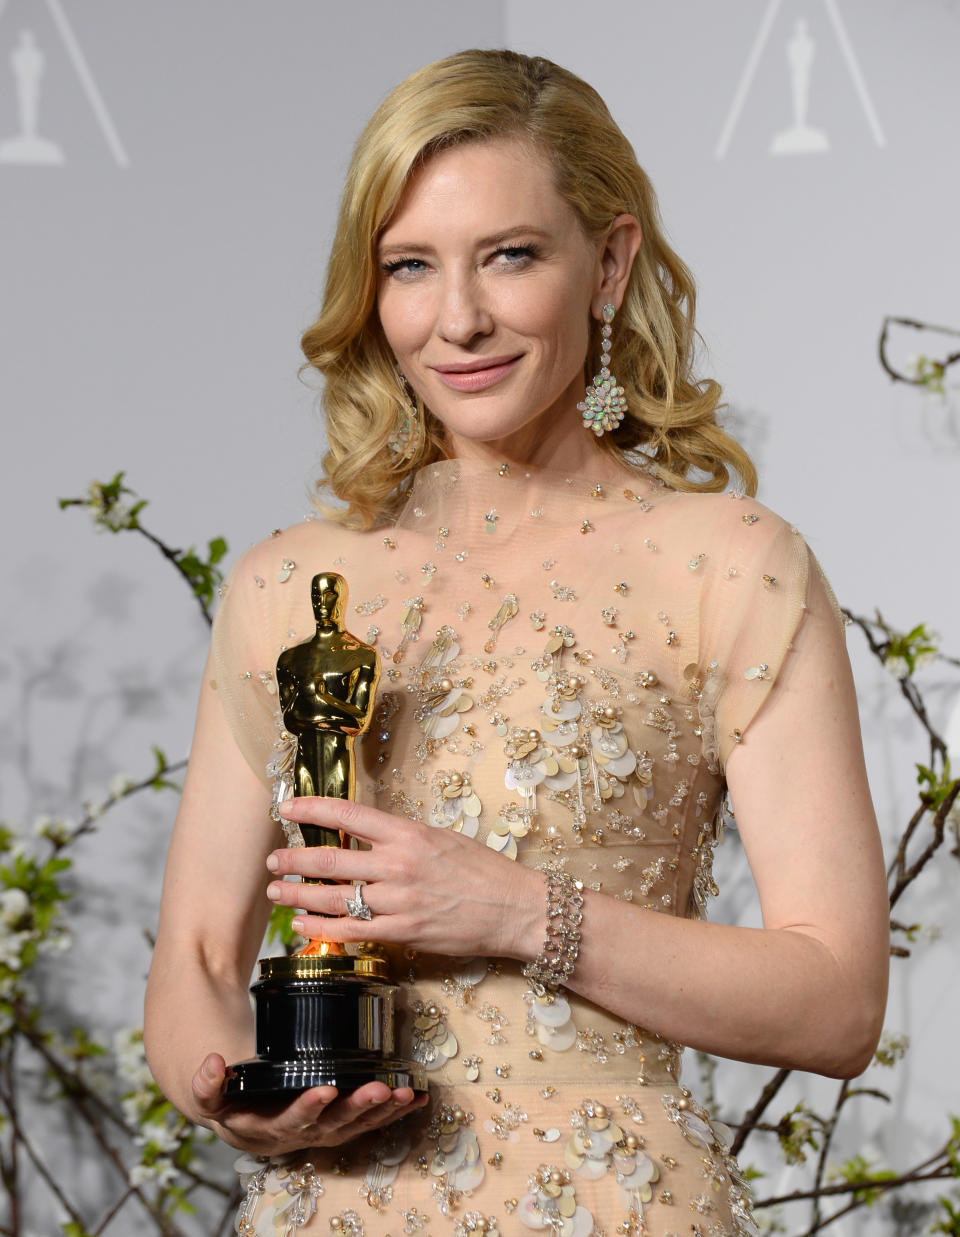 Cate Blanchett poses in the press room with the award for best actress in a leading role for "Blue Jasmine" during the Oscars at the Dolby Theatre on Sunday, March 2, 2014, in Los Angeles. (Photo by Jordan Strauss/Invision/AP)